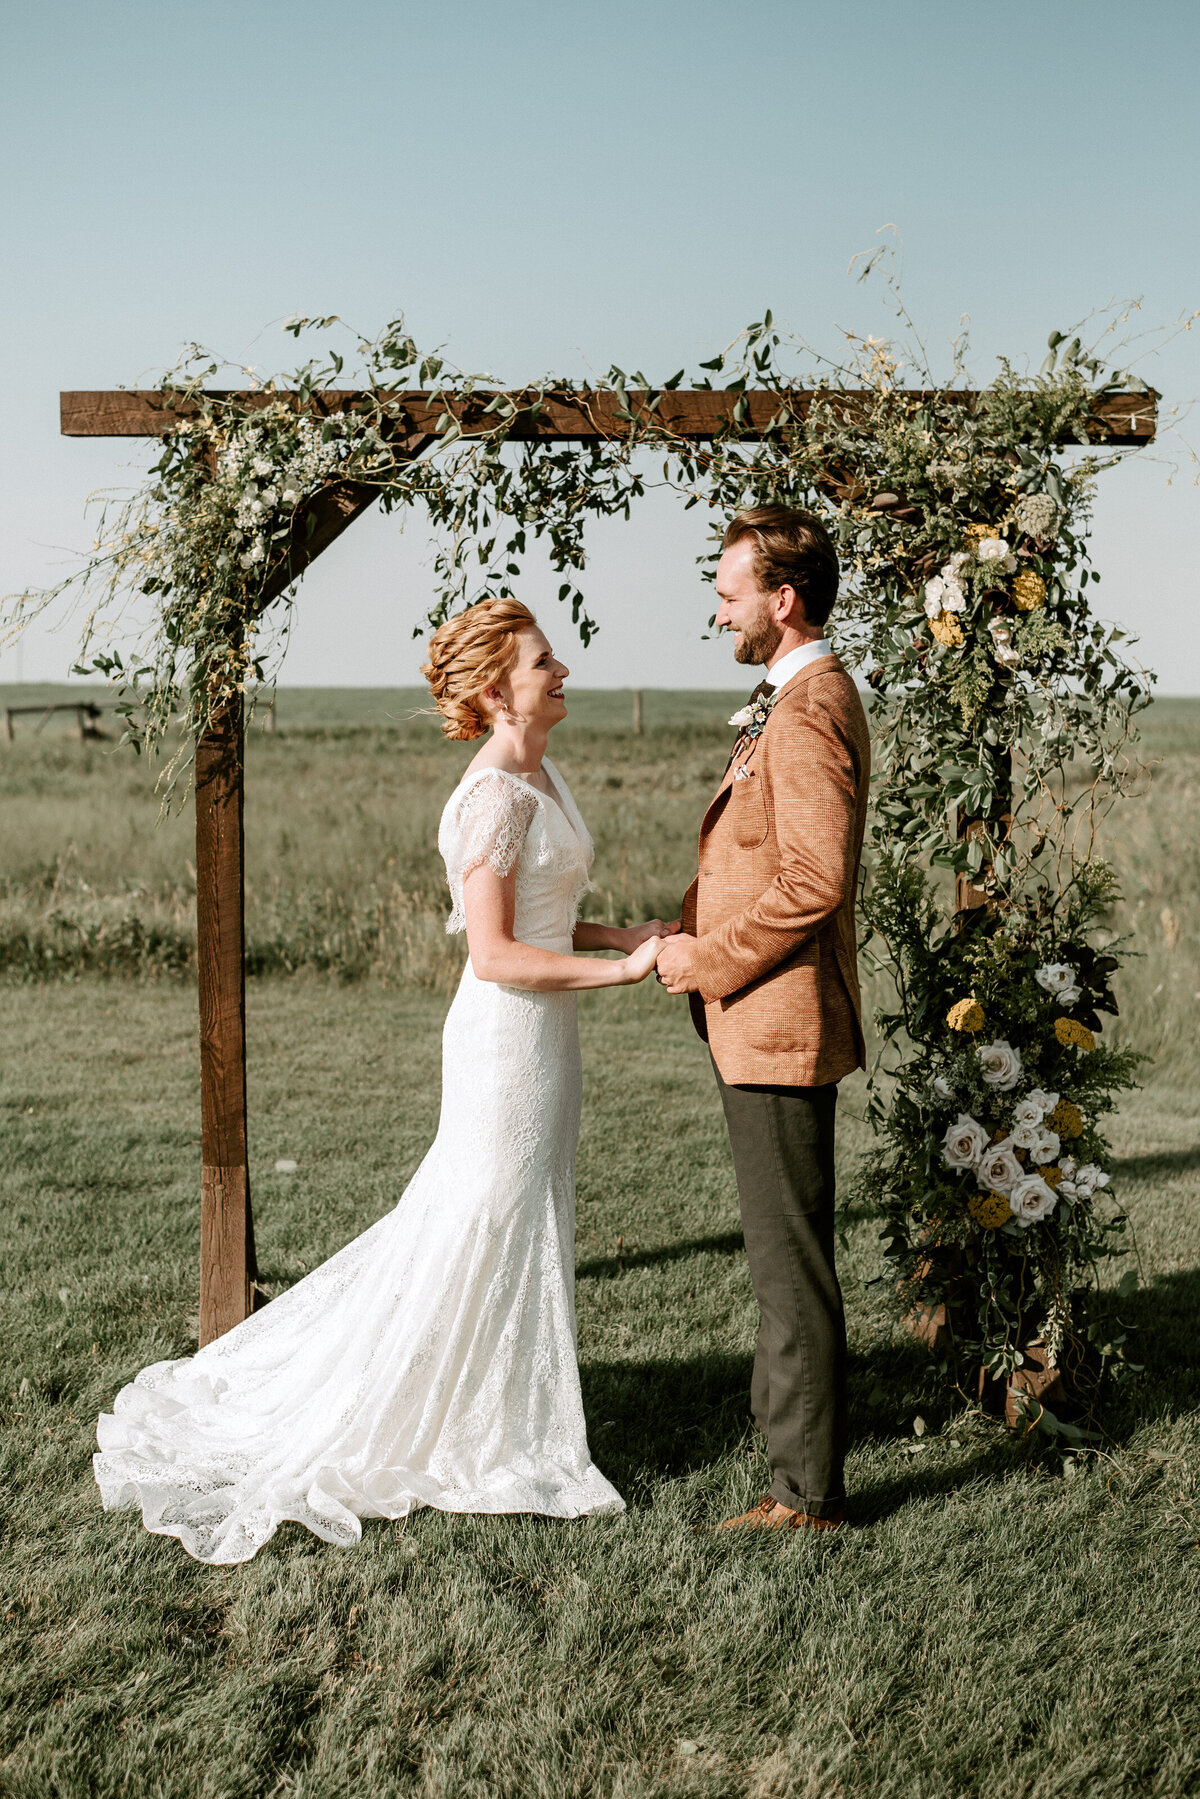 floral-and-field-design-bespoke-wedding-floral-styling-calgary-alberta-country-trails-3